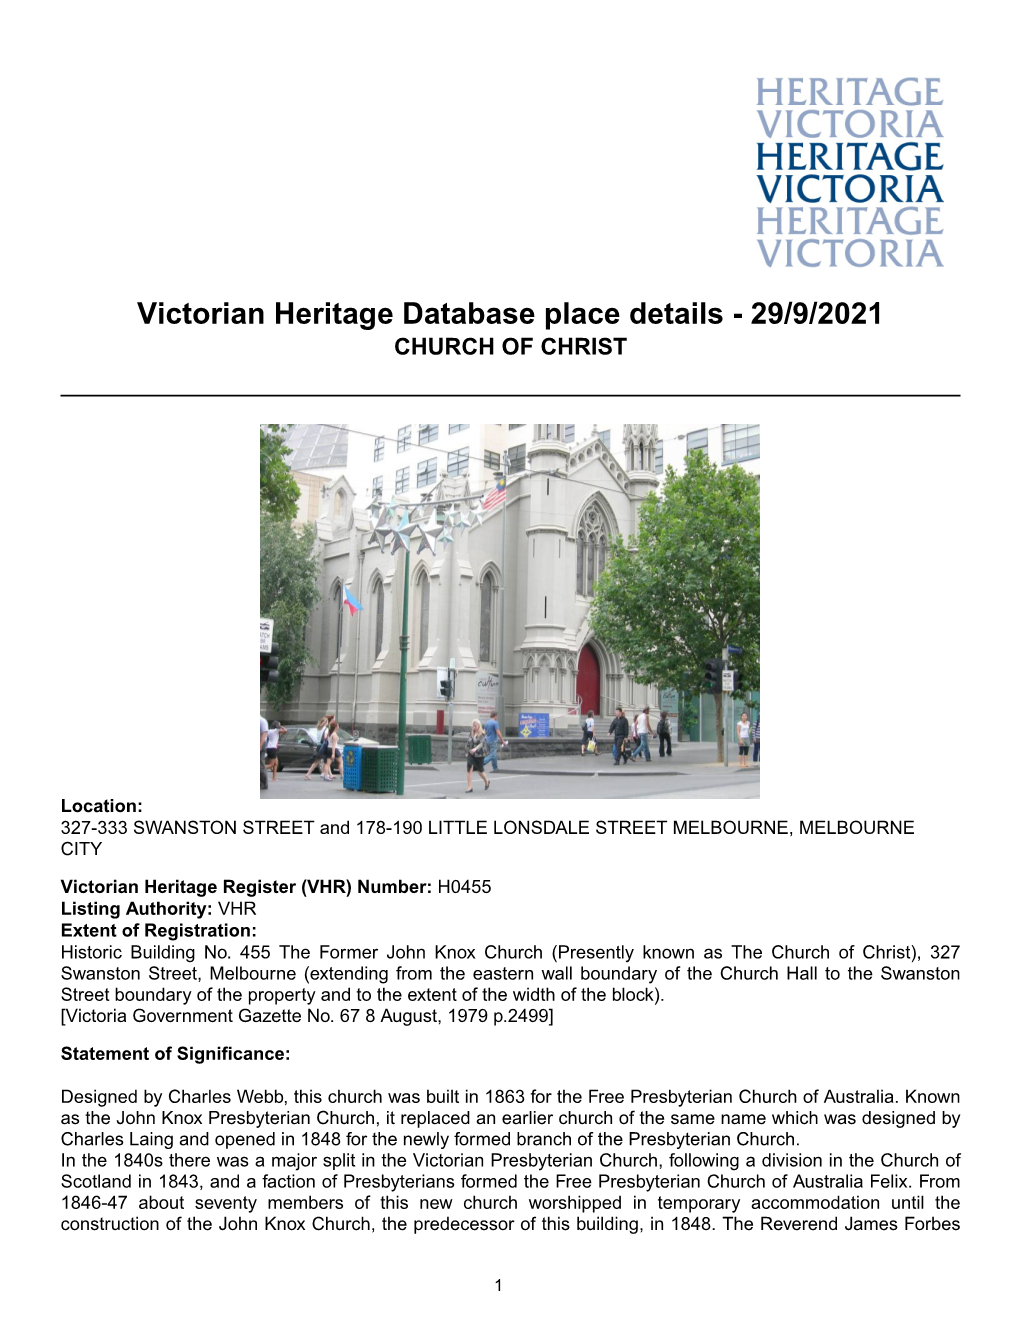 Victorian Heritage Database Place Details - 29/9/2021 CHURCH of CHRIST